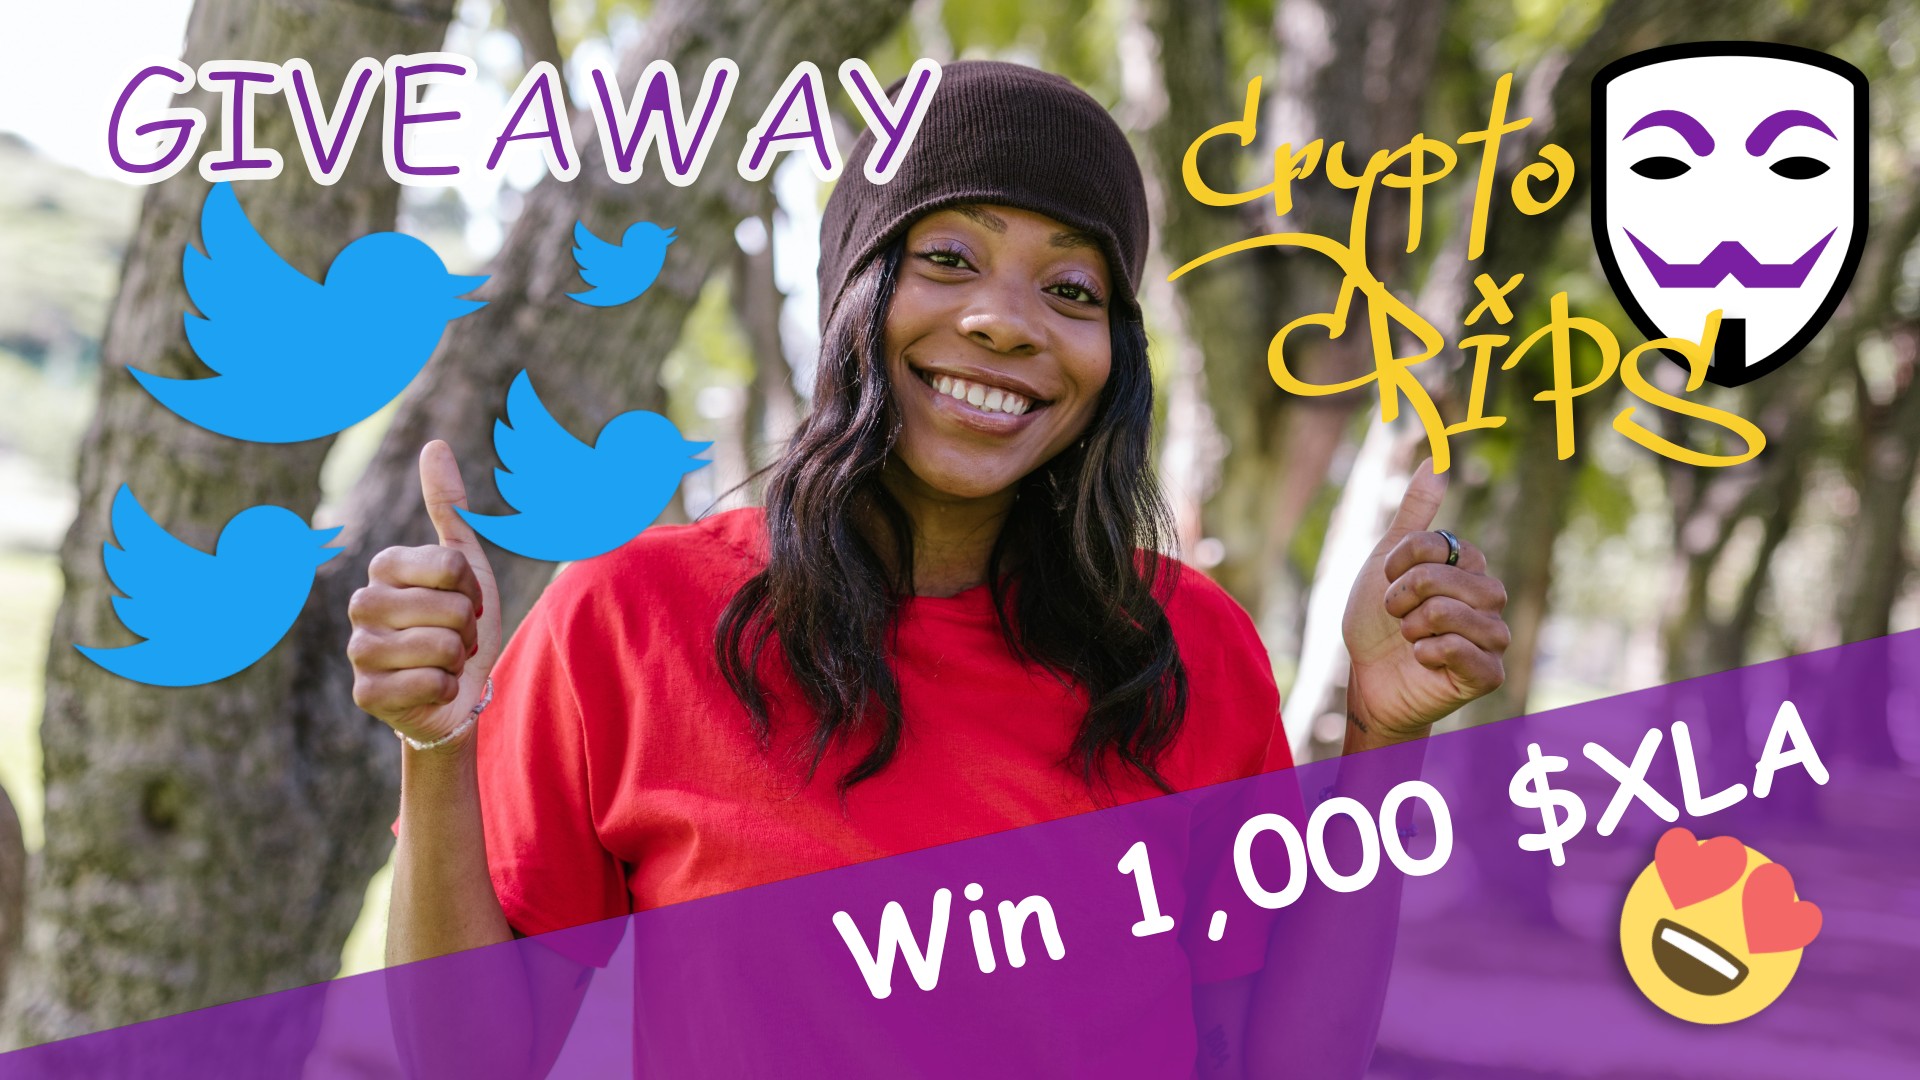 cryprocrips.ORG Twitter Giveaway: Win 1000 XLA!